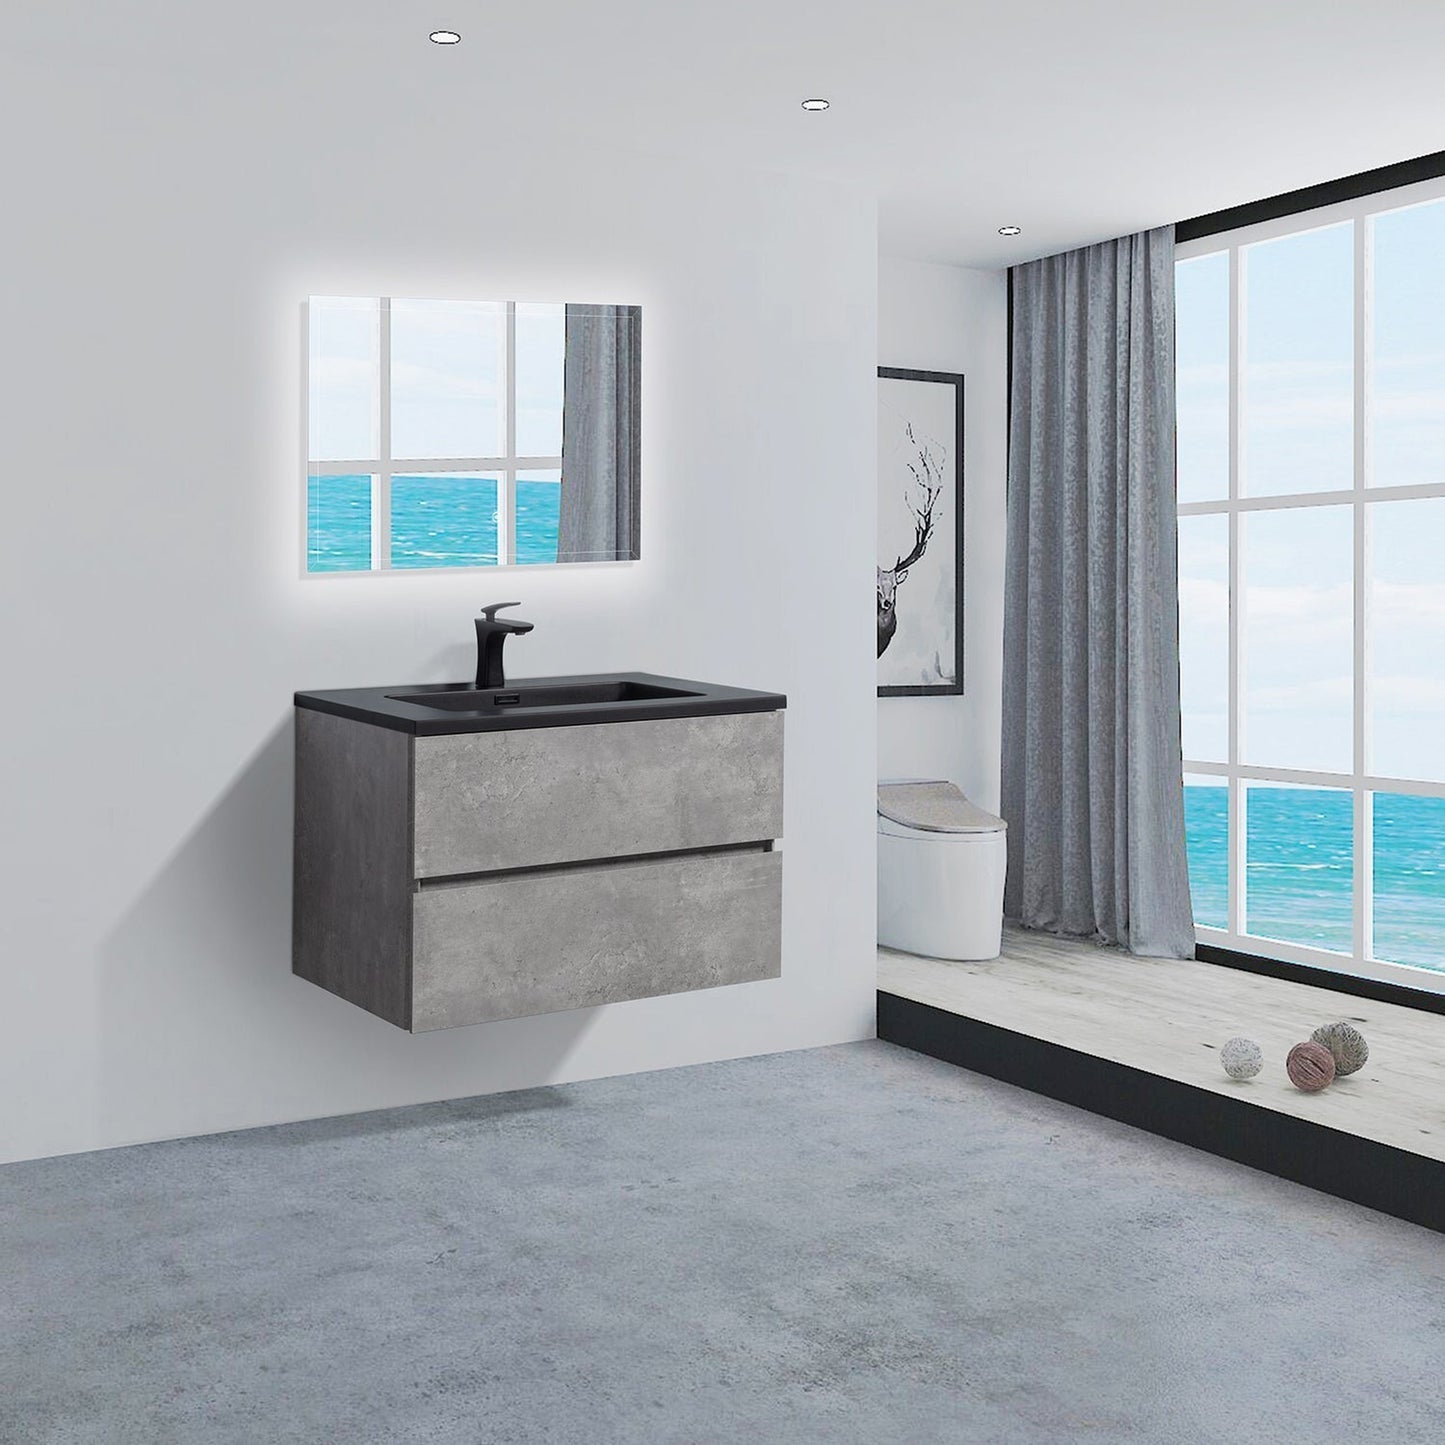 Duko Edi 36" With Black Single Basin and Drawer Cabinet Cement Gray Wooden Vanity Set